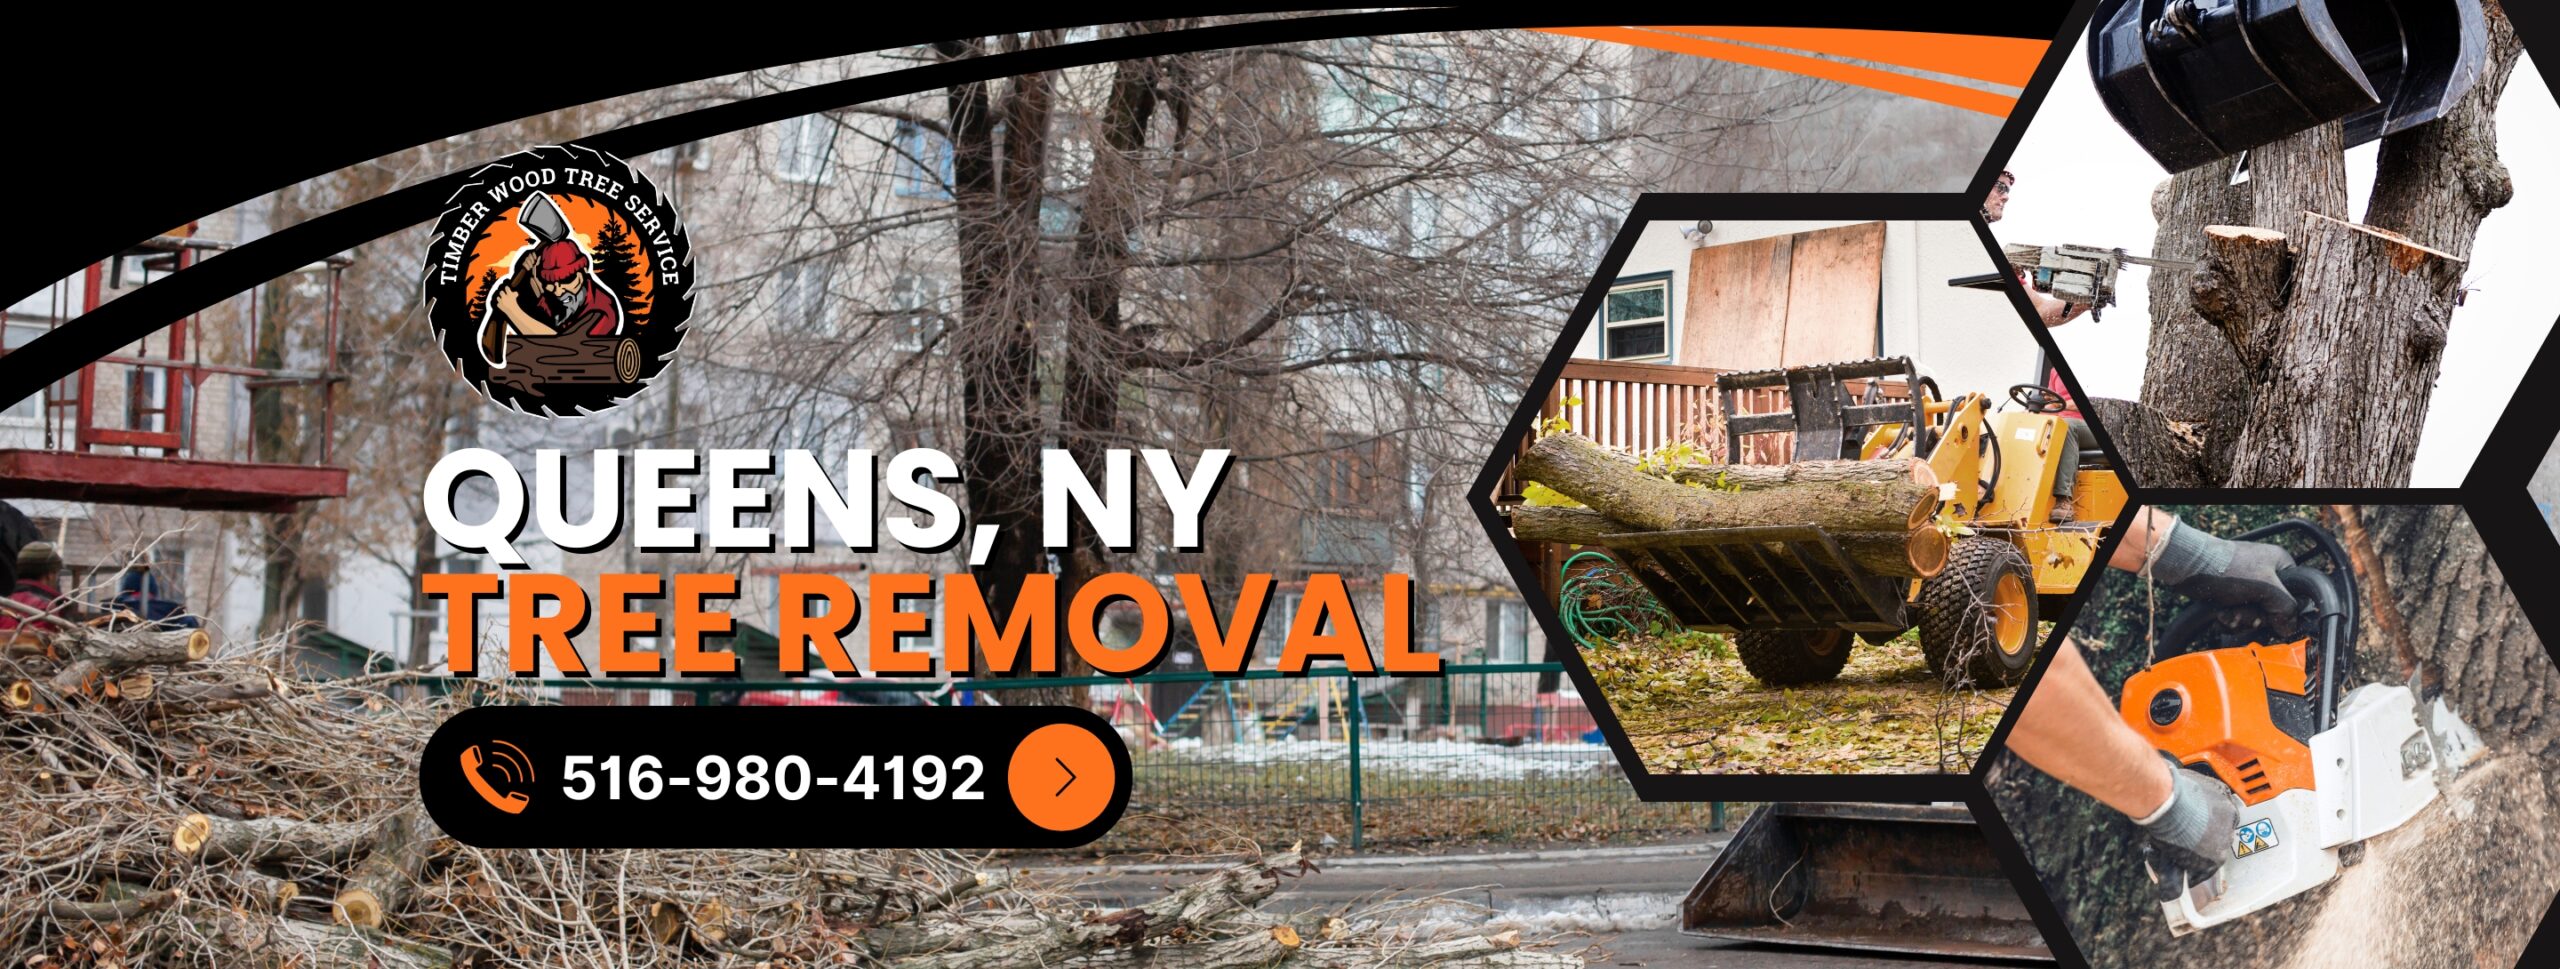 Queens-Tree-Removal